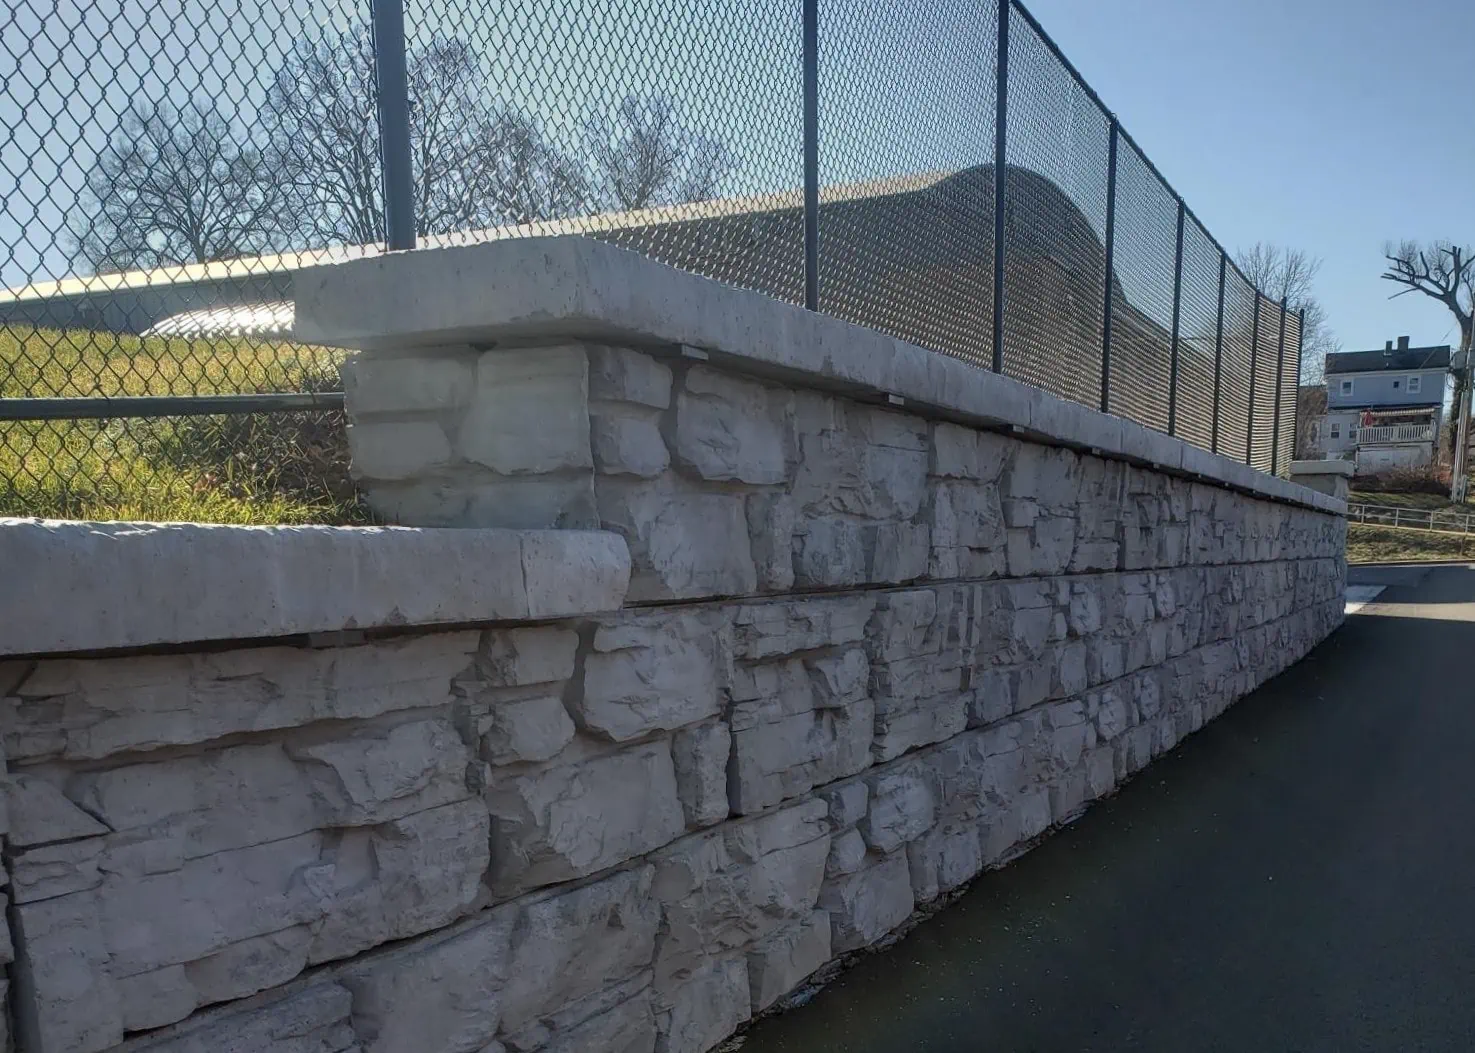 MagnumStone Retaining Wall Step-Ups and Cap Units.